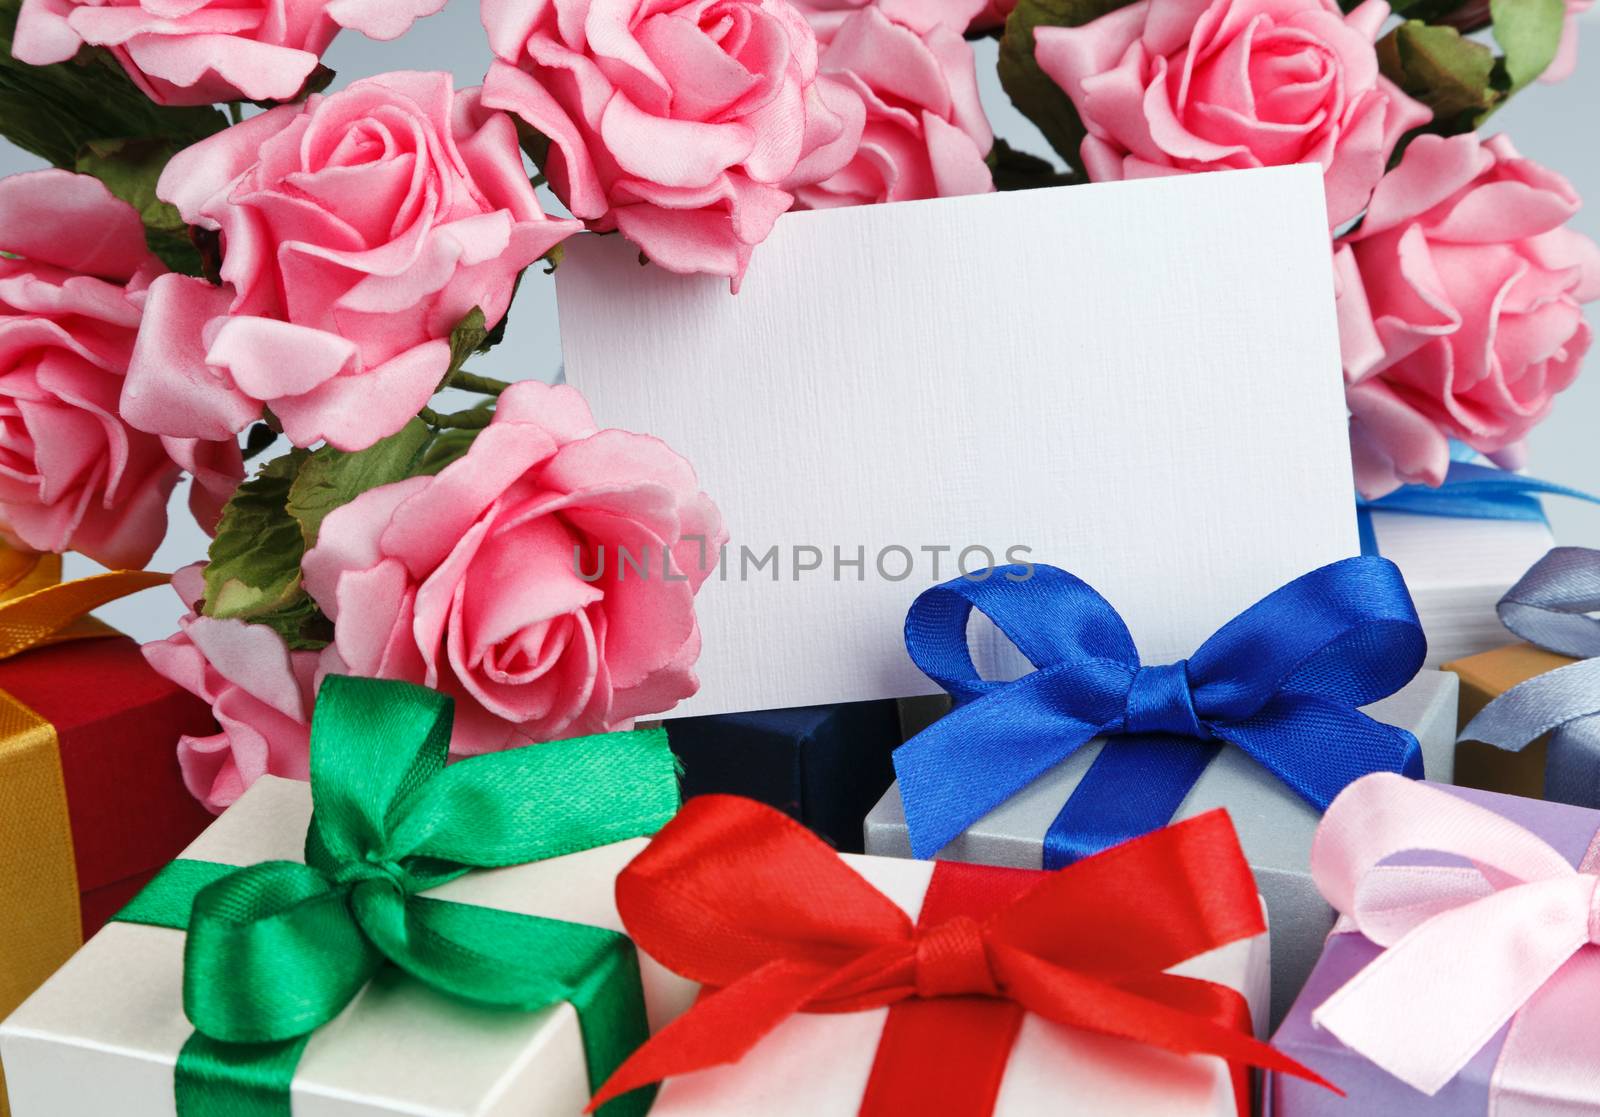 Greeting card with flowers and gift boxes